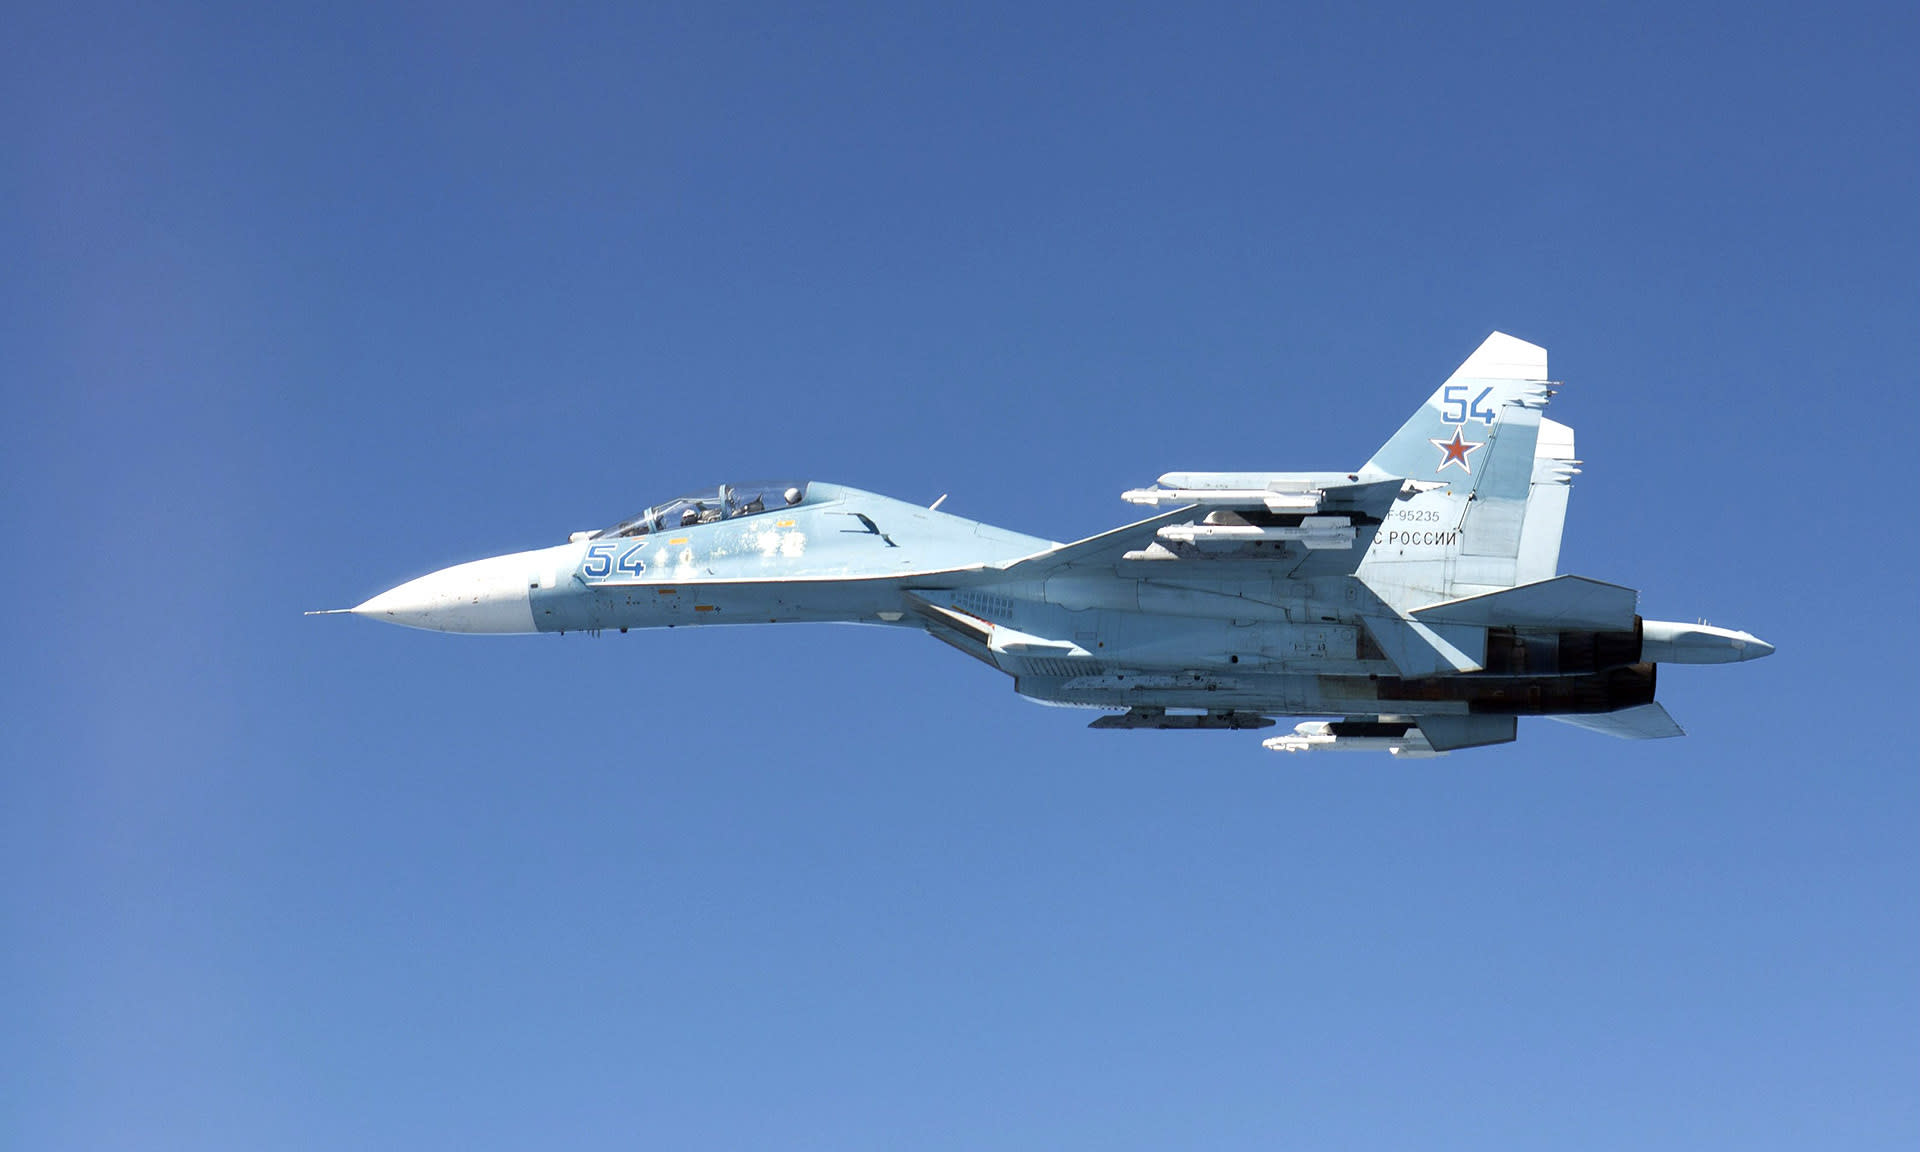 Finland, NATO allies monitor Russian air activity in the Gulf of Finland